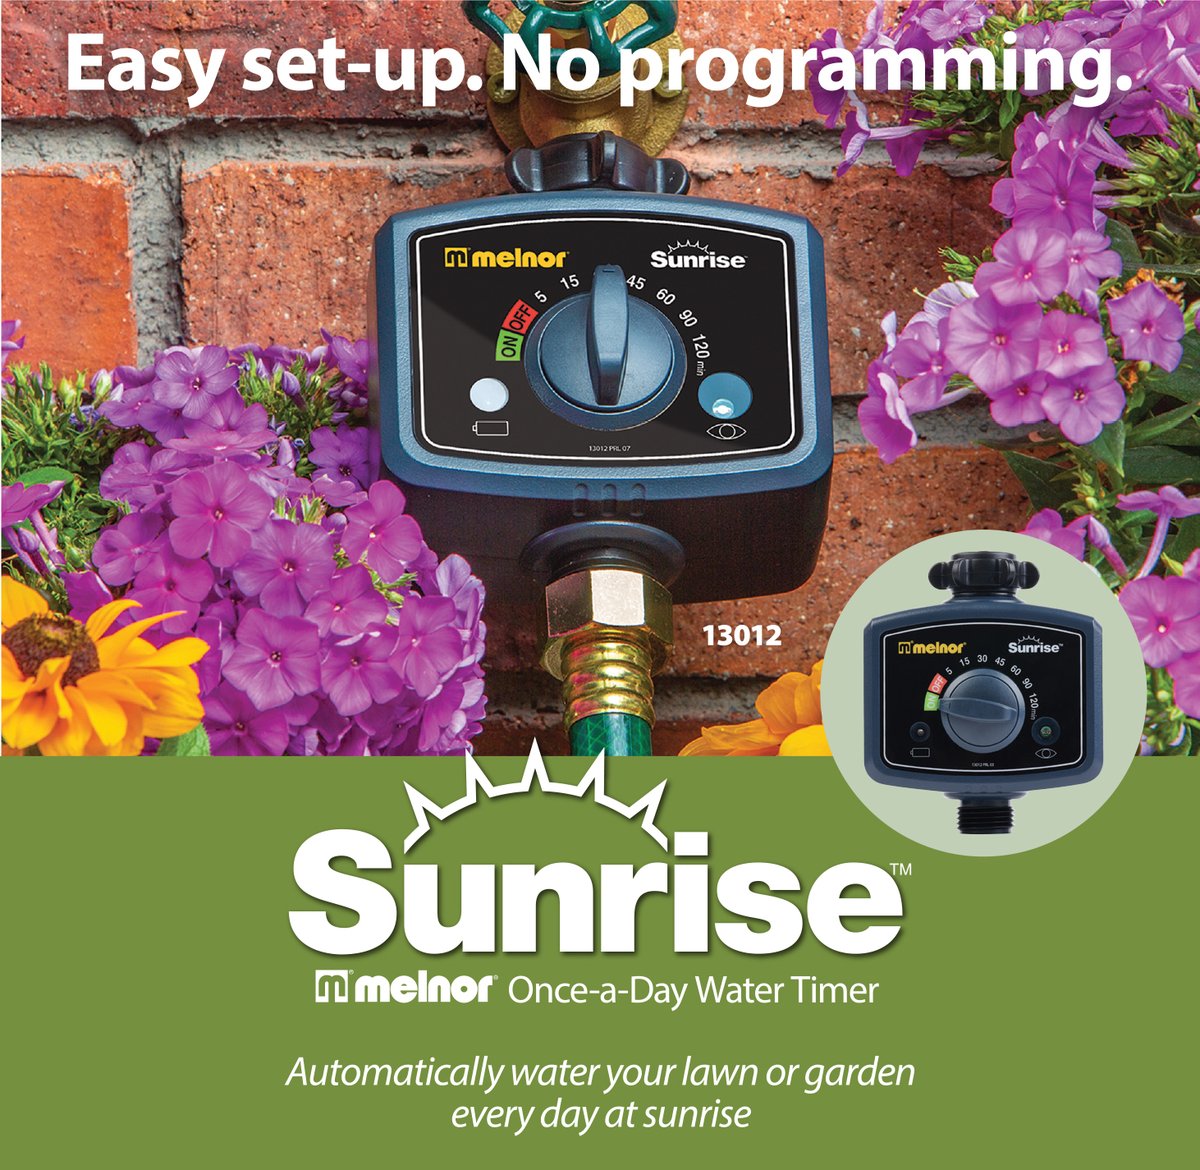 The sun comes up. The water goes on. It's that easy. The Melnor Sunrise Water Timer 🌞

Find it on Amazon!
ow.ly/qeNJ50R626u

#melnor #sunrise #watertimer #sunshine #watering #irrigation #flowers #gardening #lawncare #lawns #gardens #diygarden #diylawncare